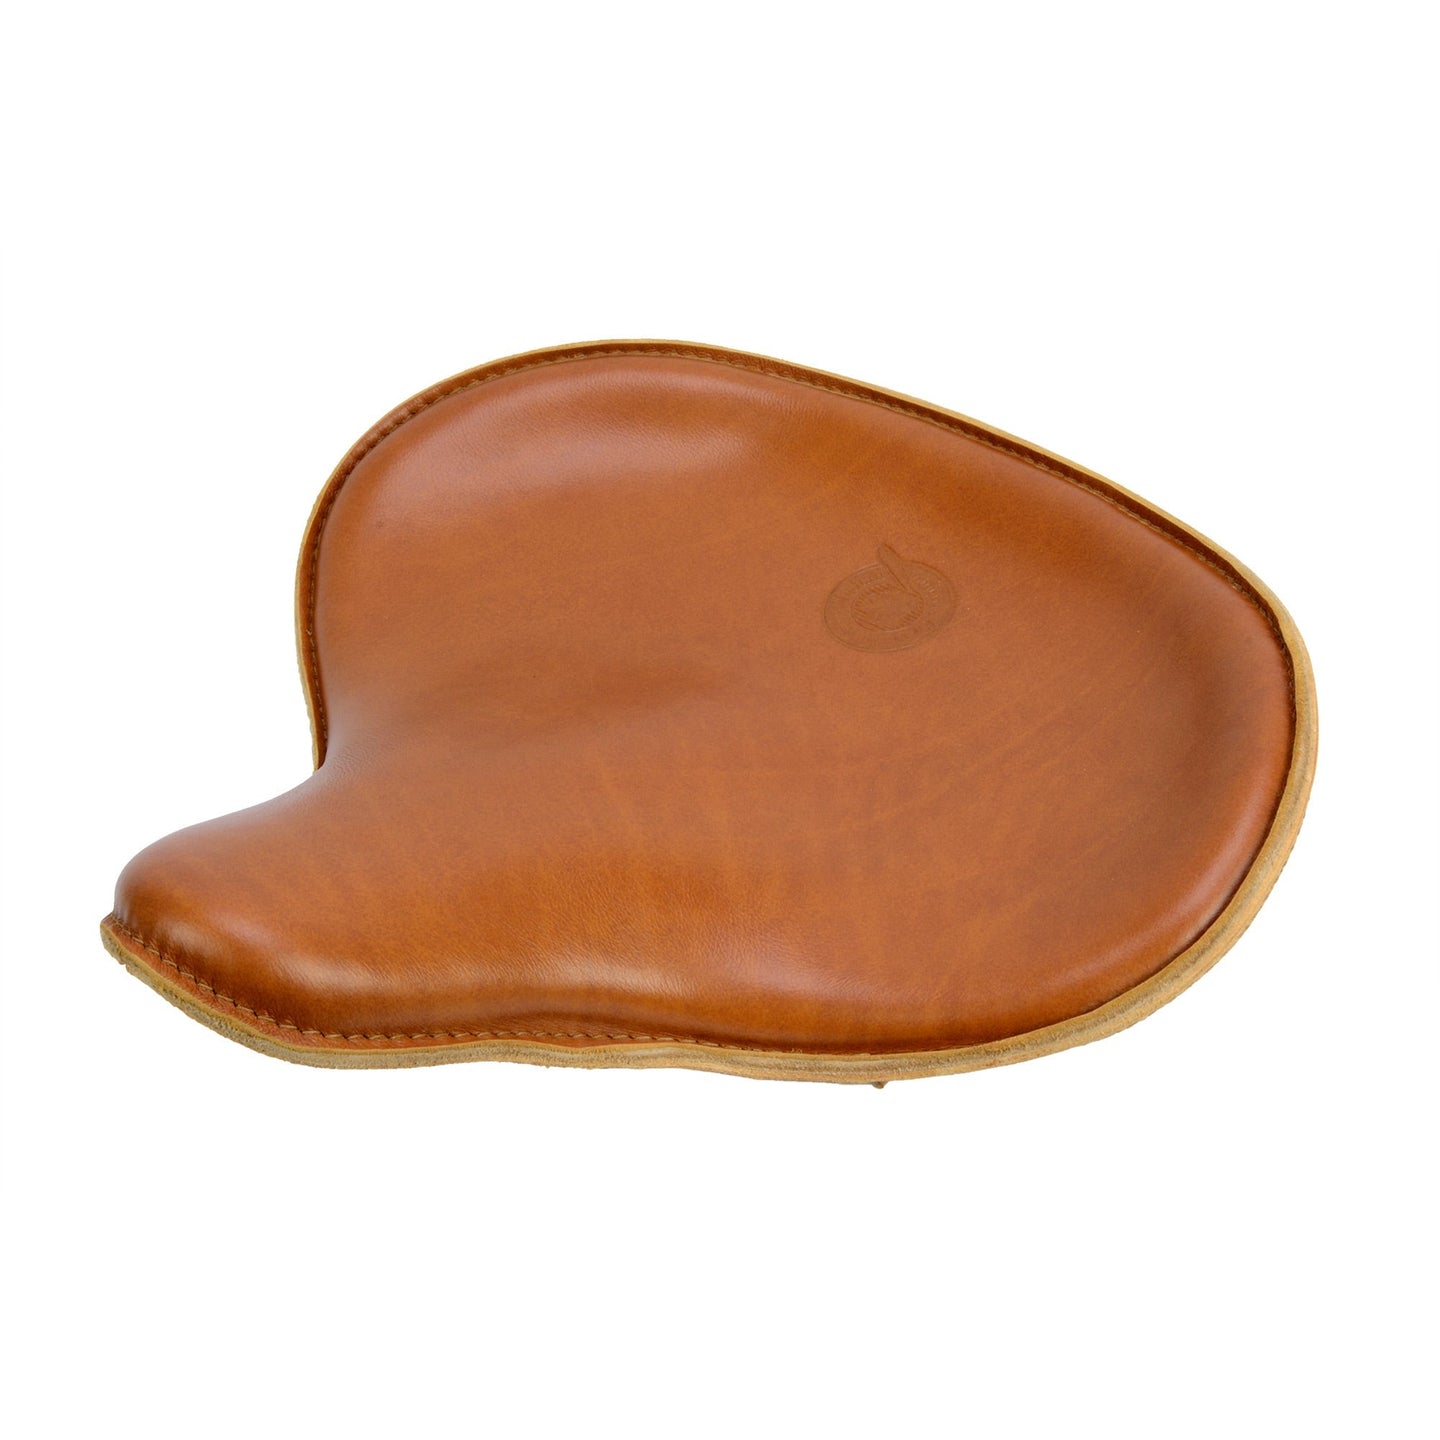 Solo Seat - Tan Plain with Raw Edge and Thin Padding